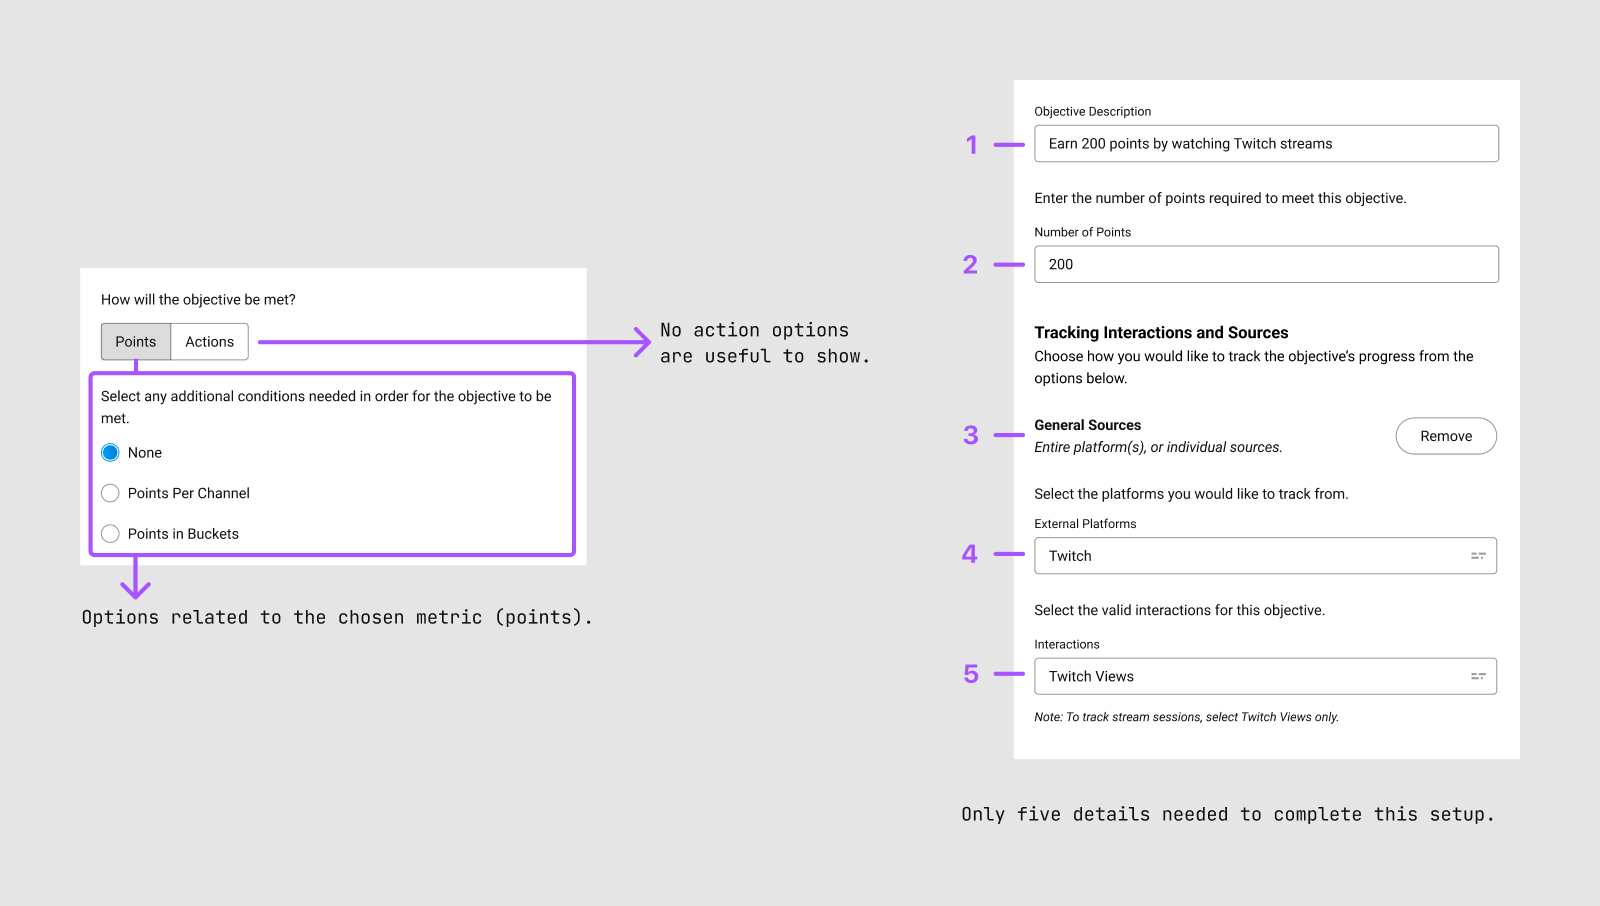 Two examples of disclosure: using a display switcher to only show relevant conditions for a metric, and showing how hiding options reduced the number of choices to 5 when building an Objective for earning points by watching Twitch streams.